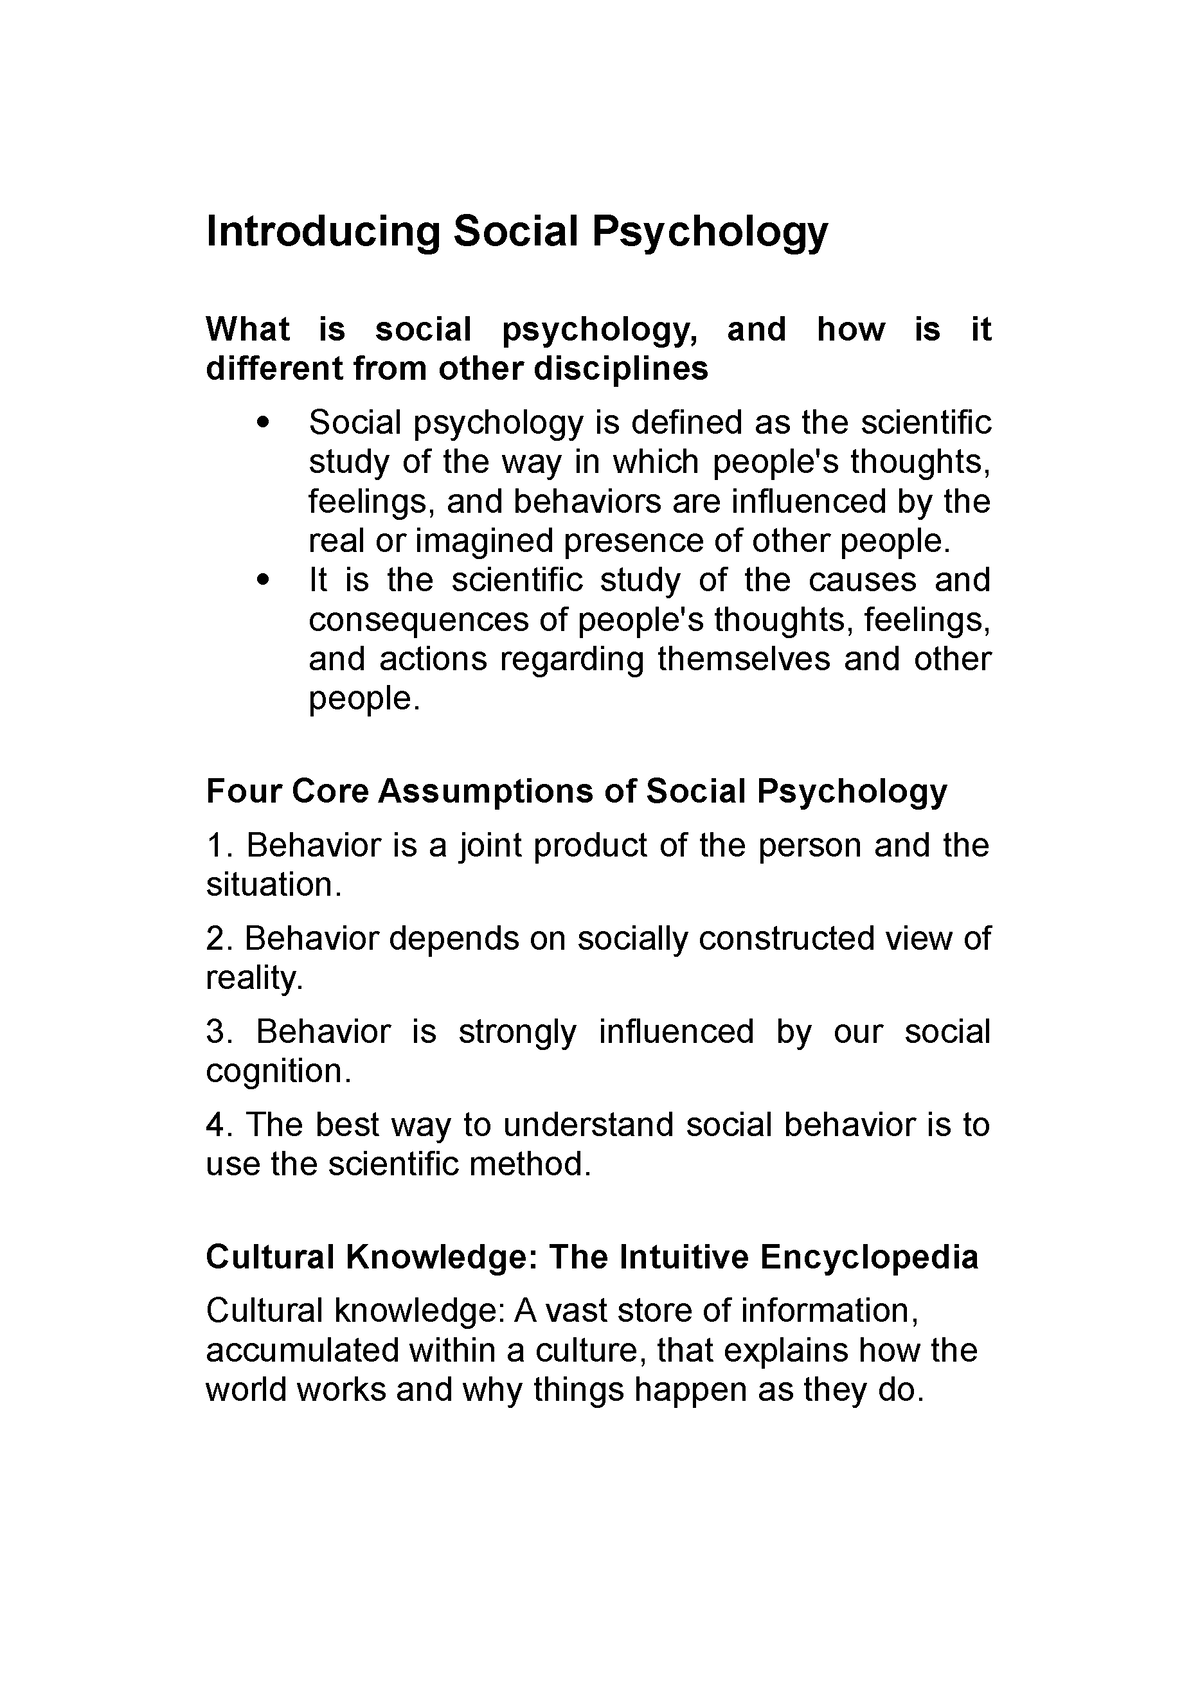 research study about social psychology